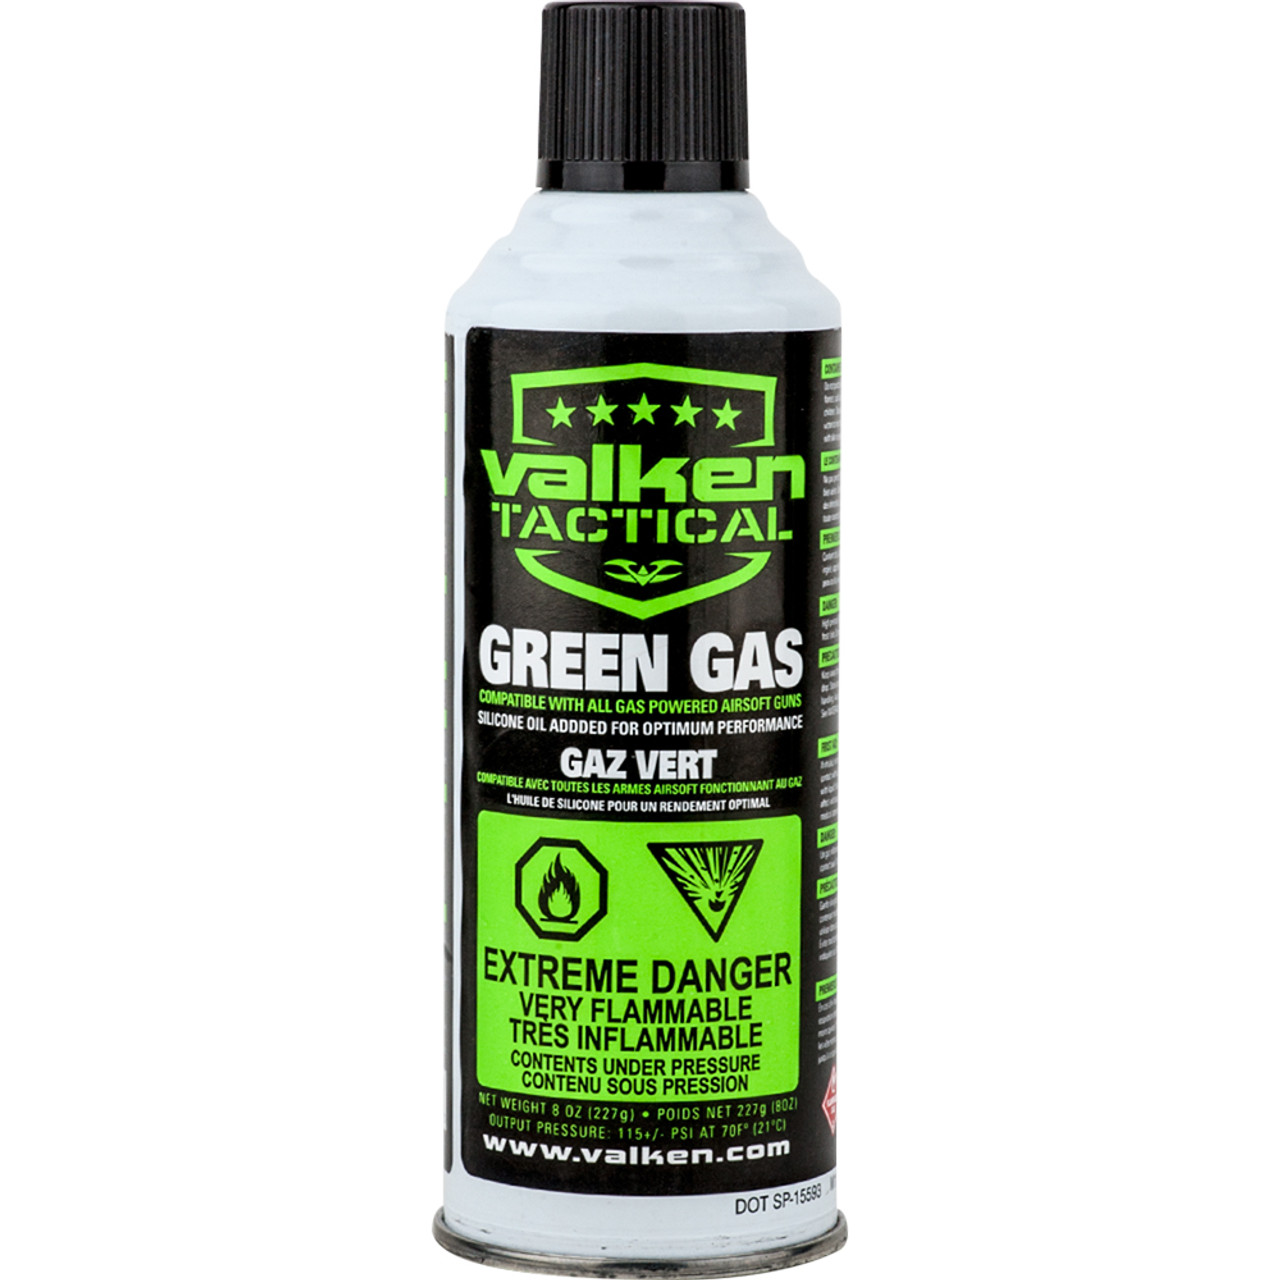 VALKEN AIRSOFT GREEN GAS 8 OZ CAN low price of $10.19